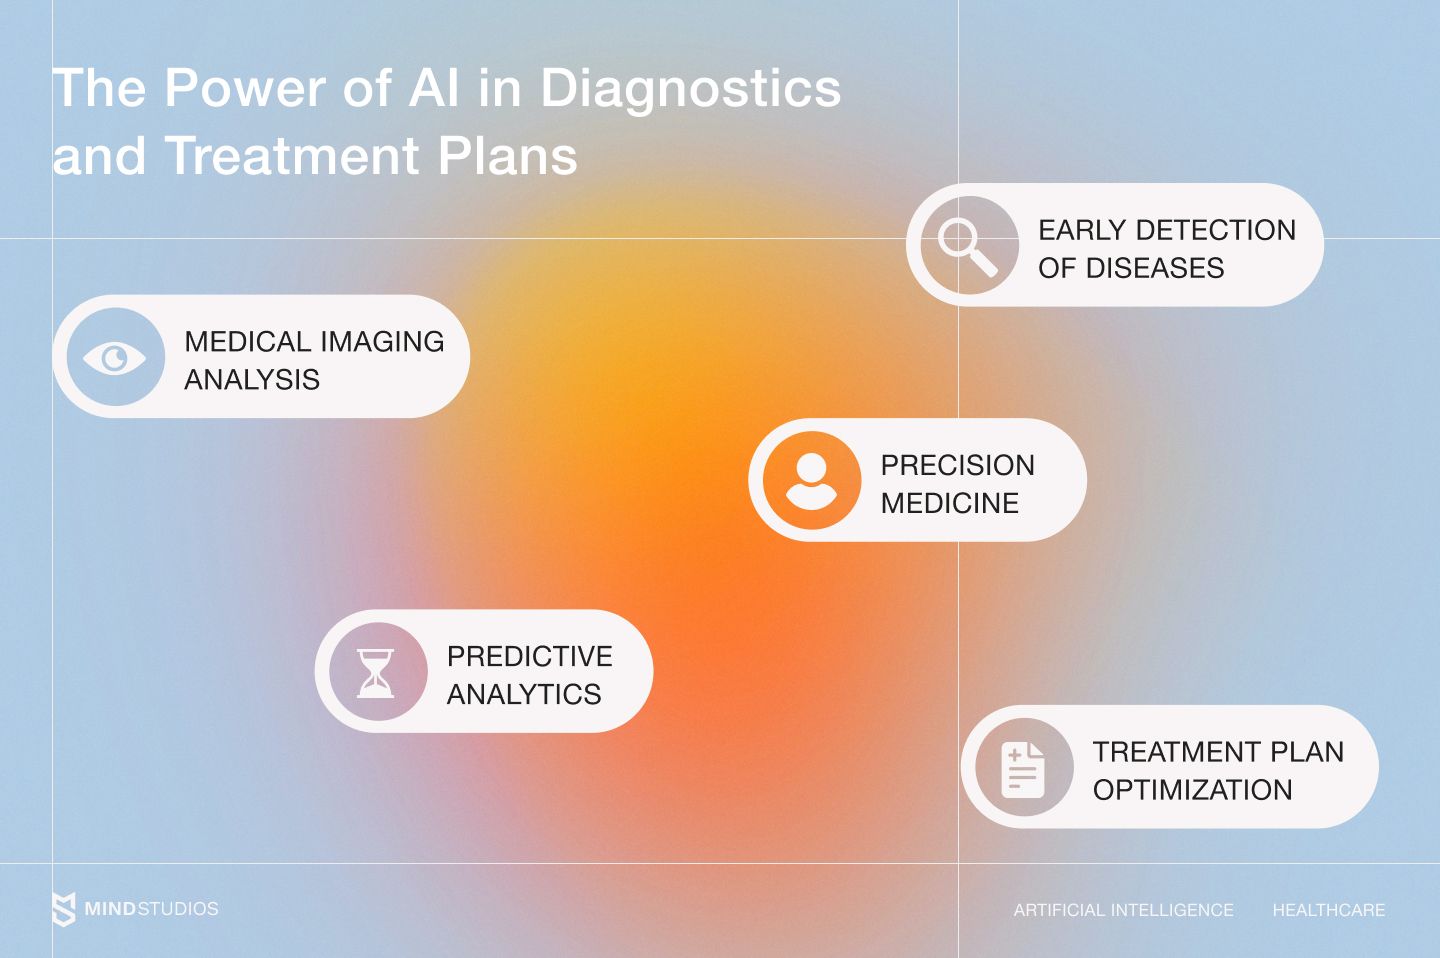 The power of AI in diagnostics and treatment plans